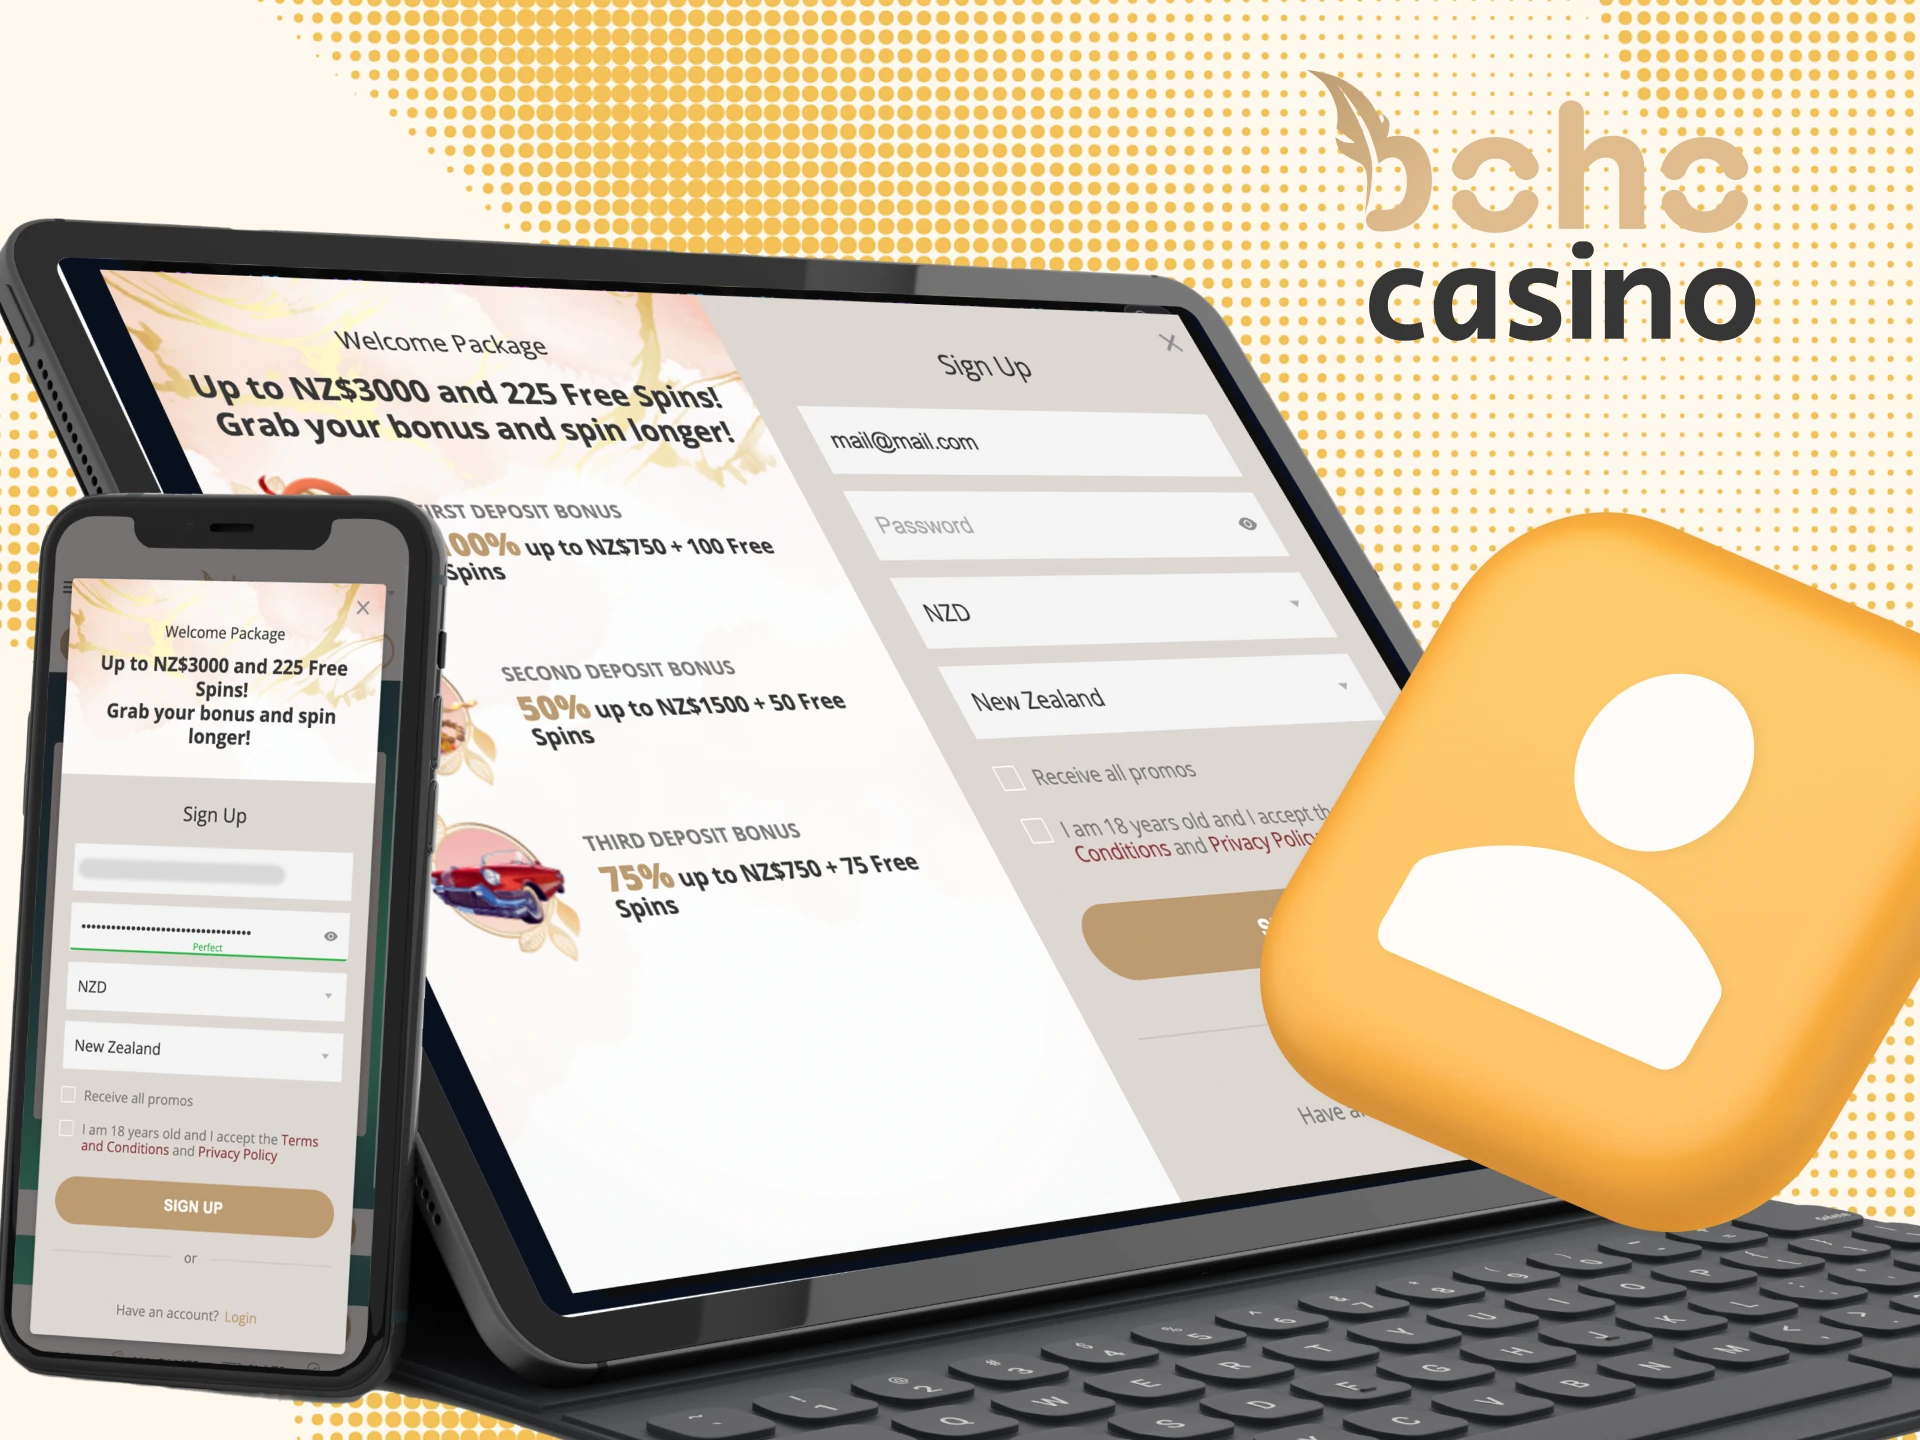 Instructions on how to register on the Boho online casino website.